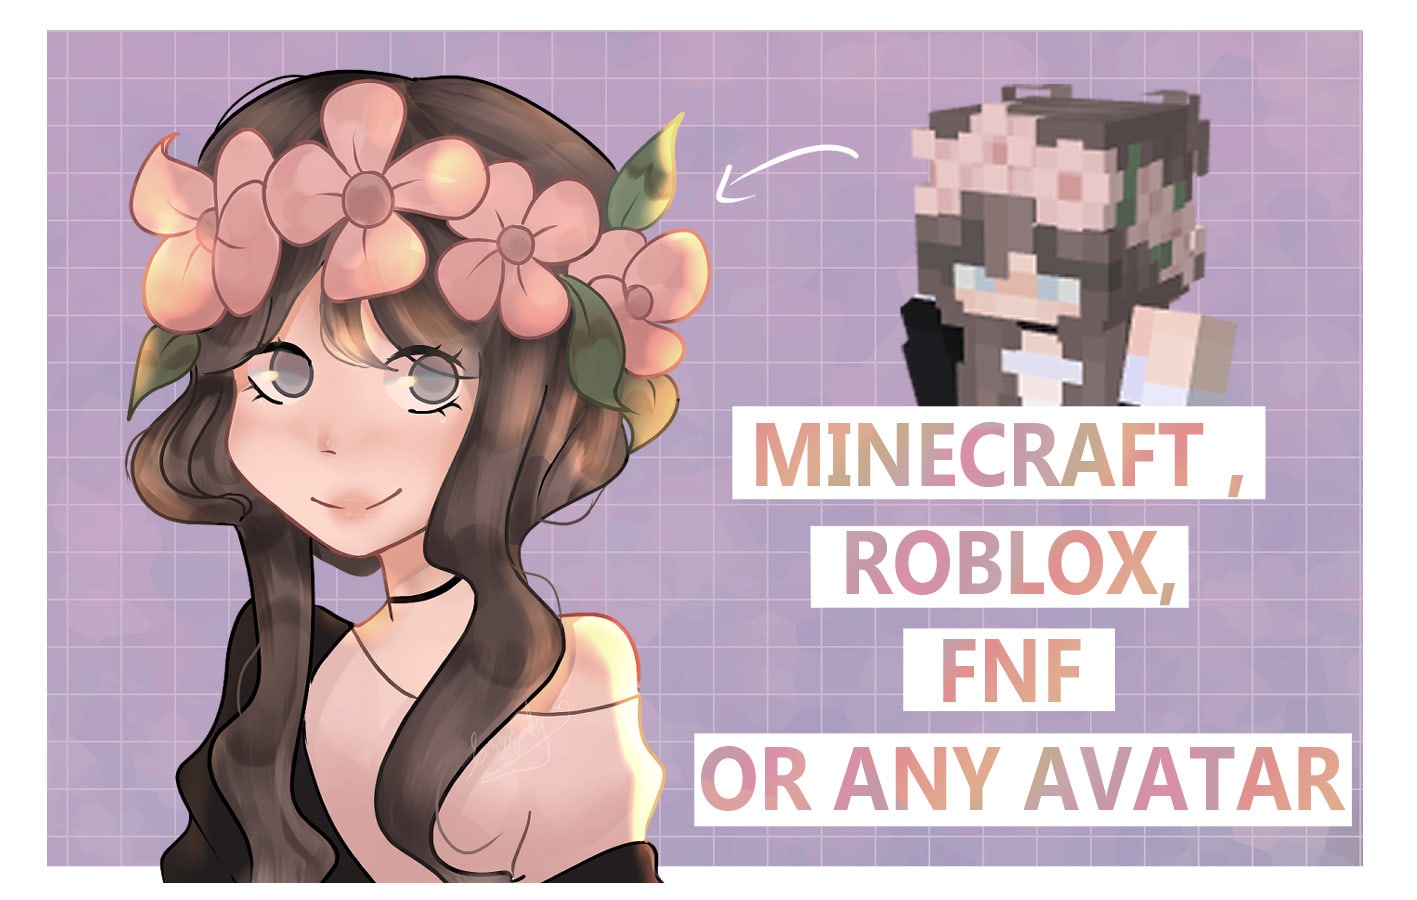 Drew my old roblox avatar as an FNF icon : r/roblox